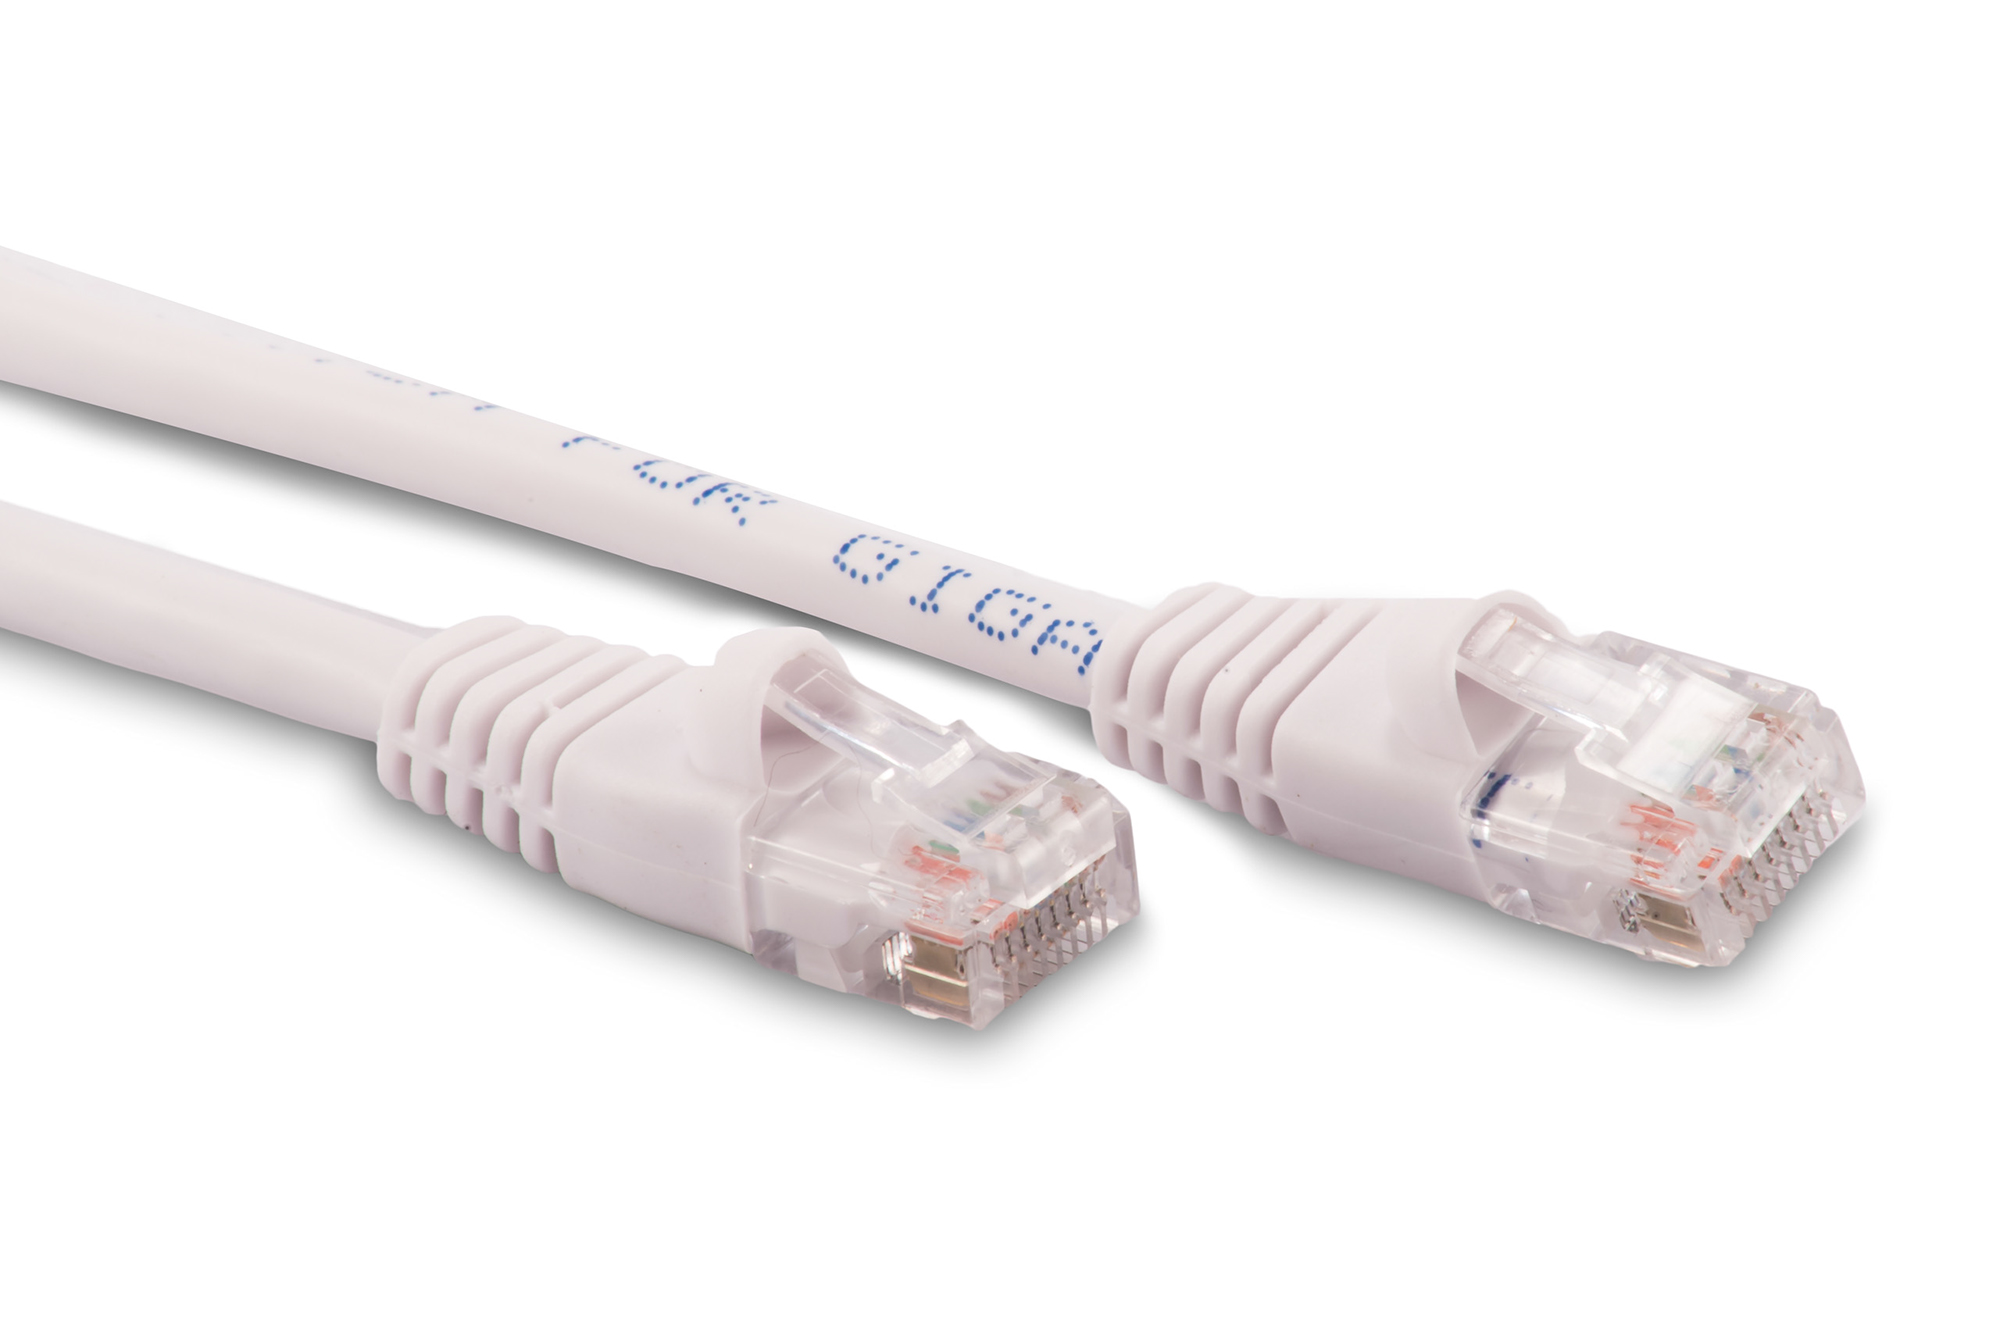 30ft Cat6 Ethernet Patch Cable - White Color - Snagless Boot